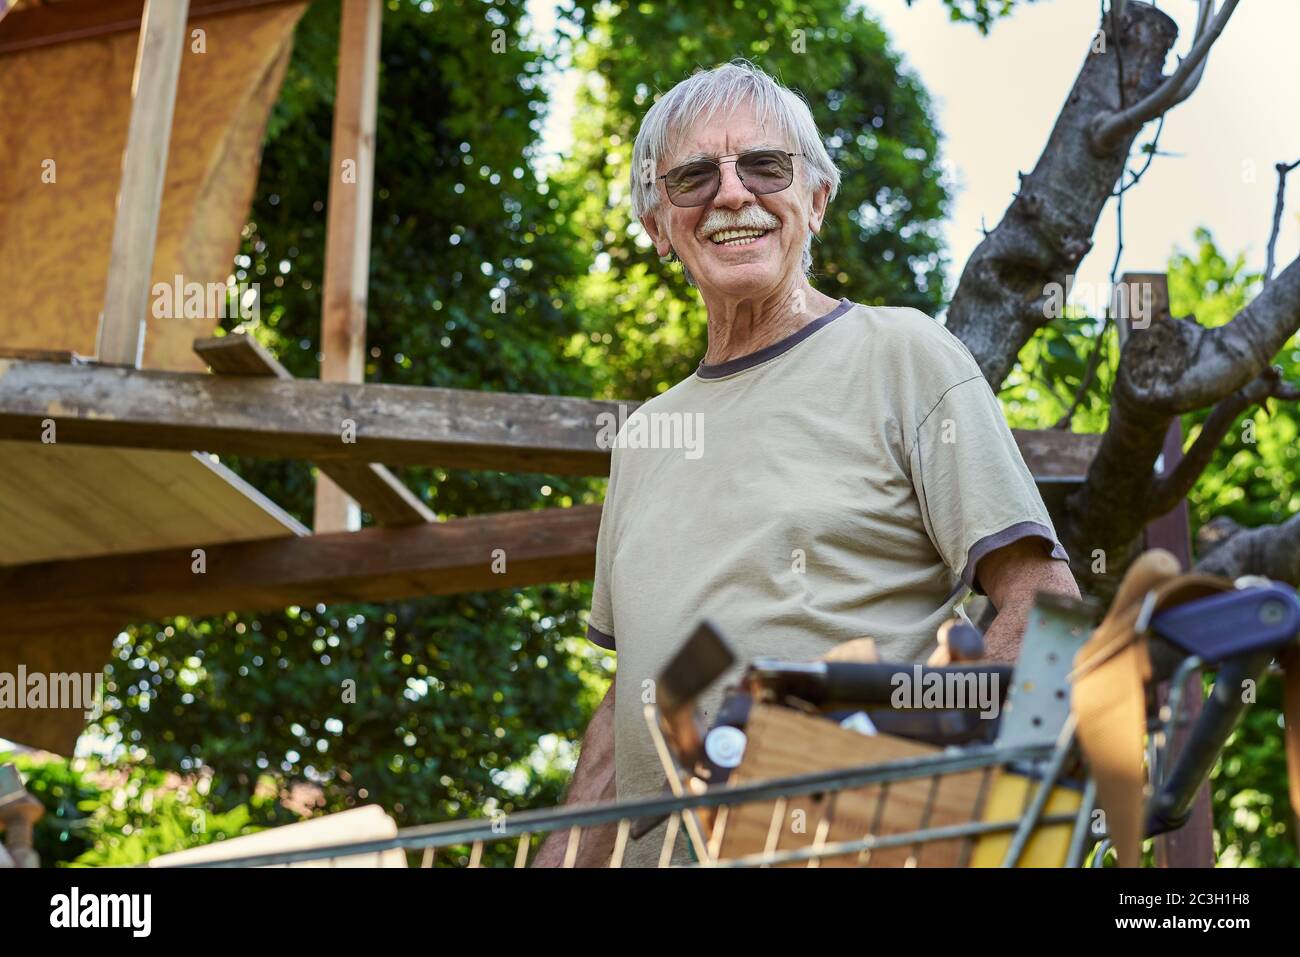 Retired happy senior Man in his 70s building a tree house at his back yard during warm summer day. Big smile showing nice teeth, gray hair. Stock Photo